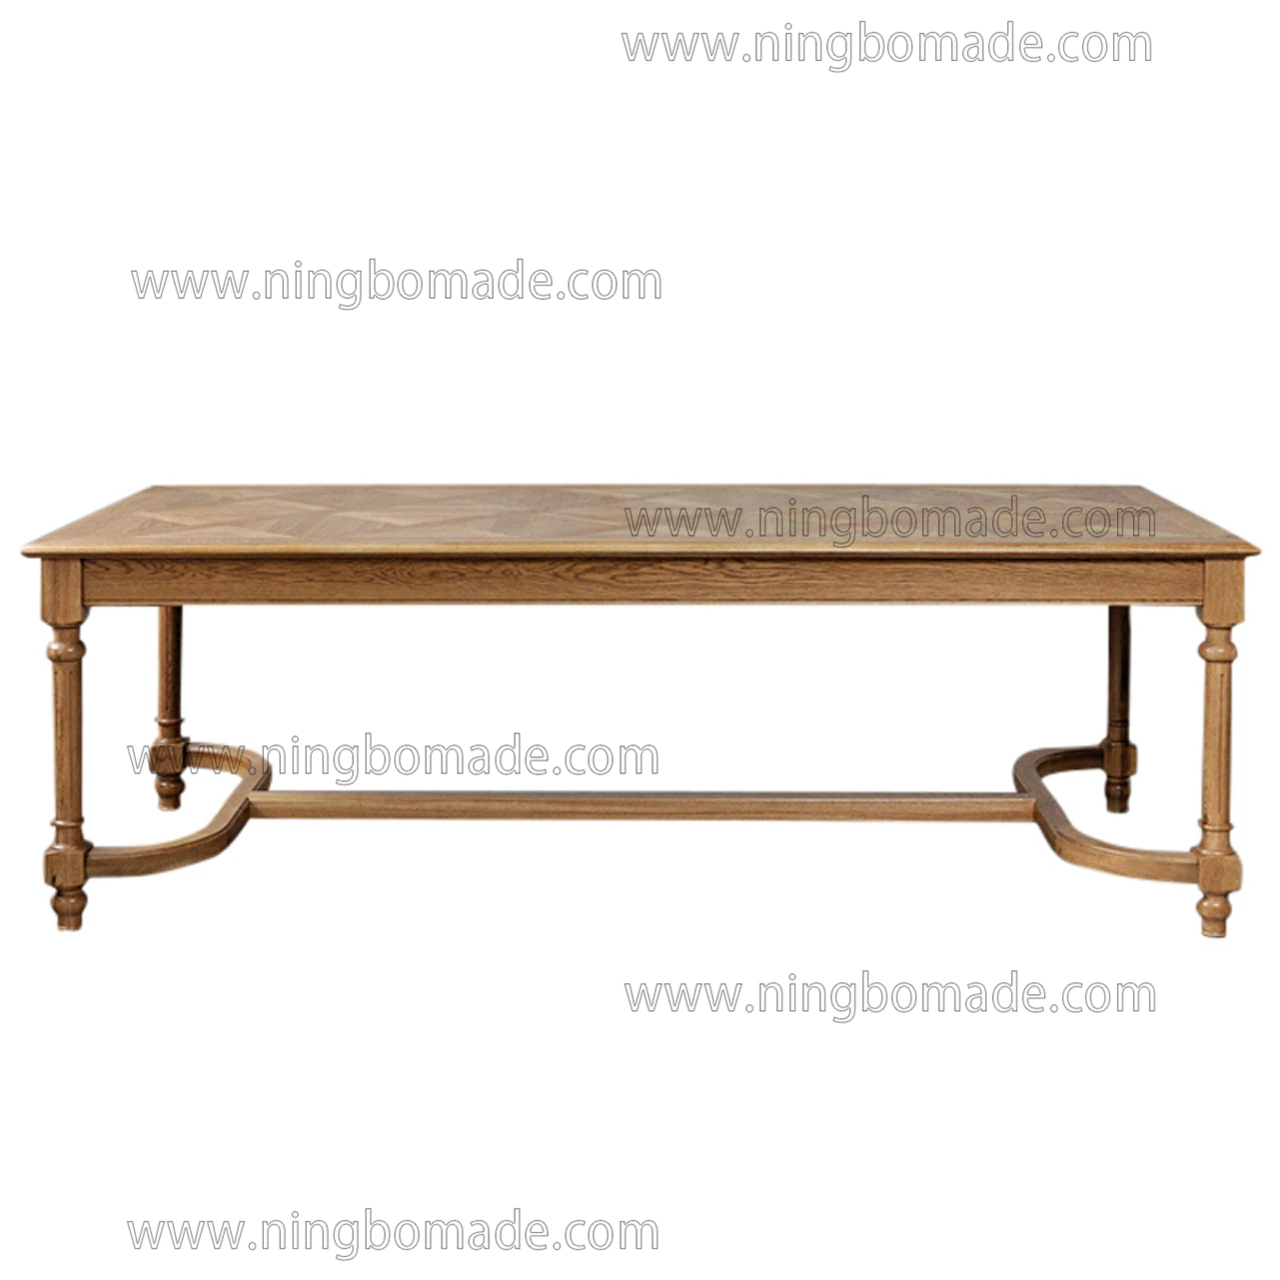 Solid Oak Wood Nature Oil Cross Panel Top Dining Table